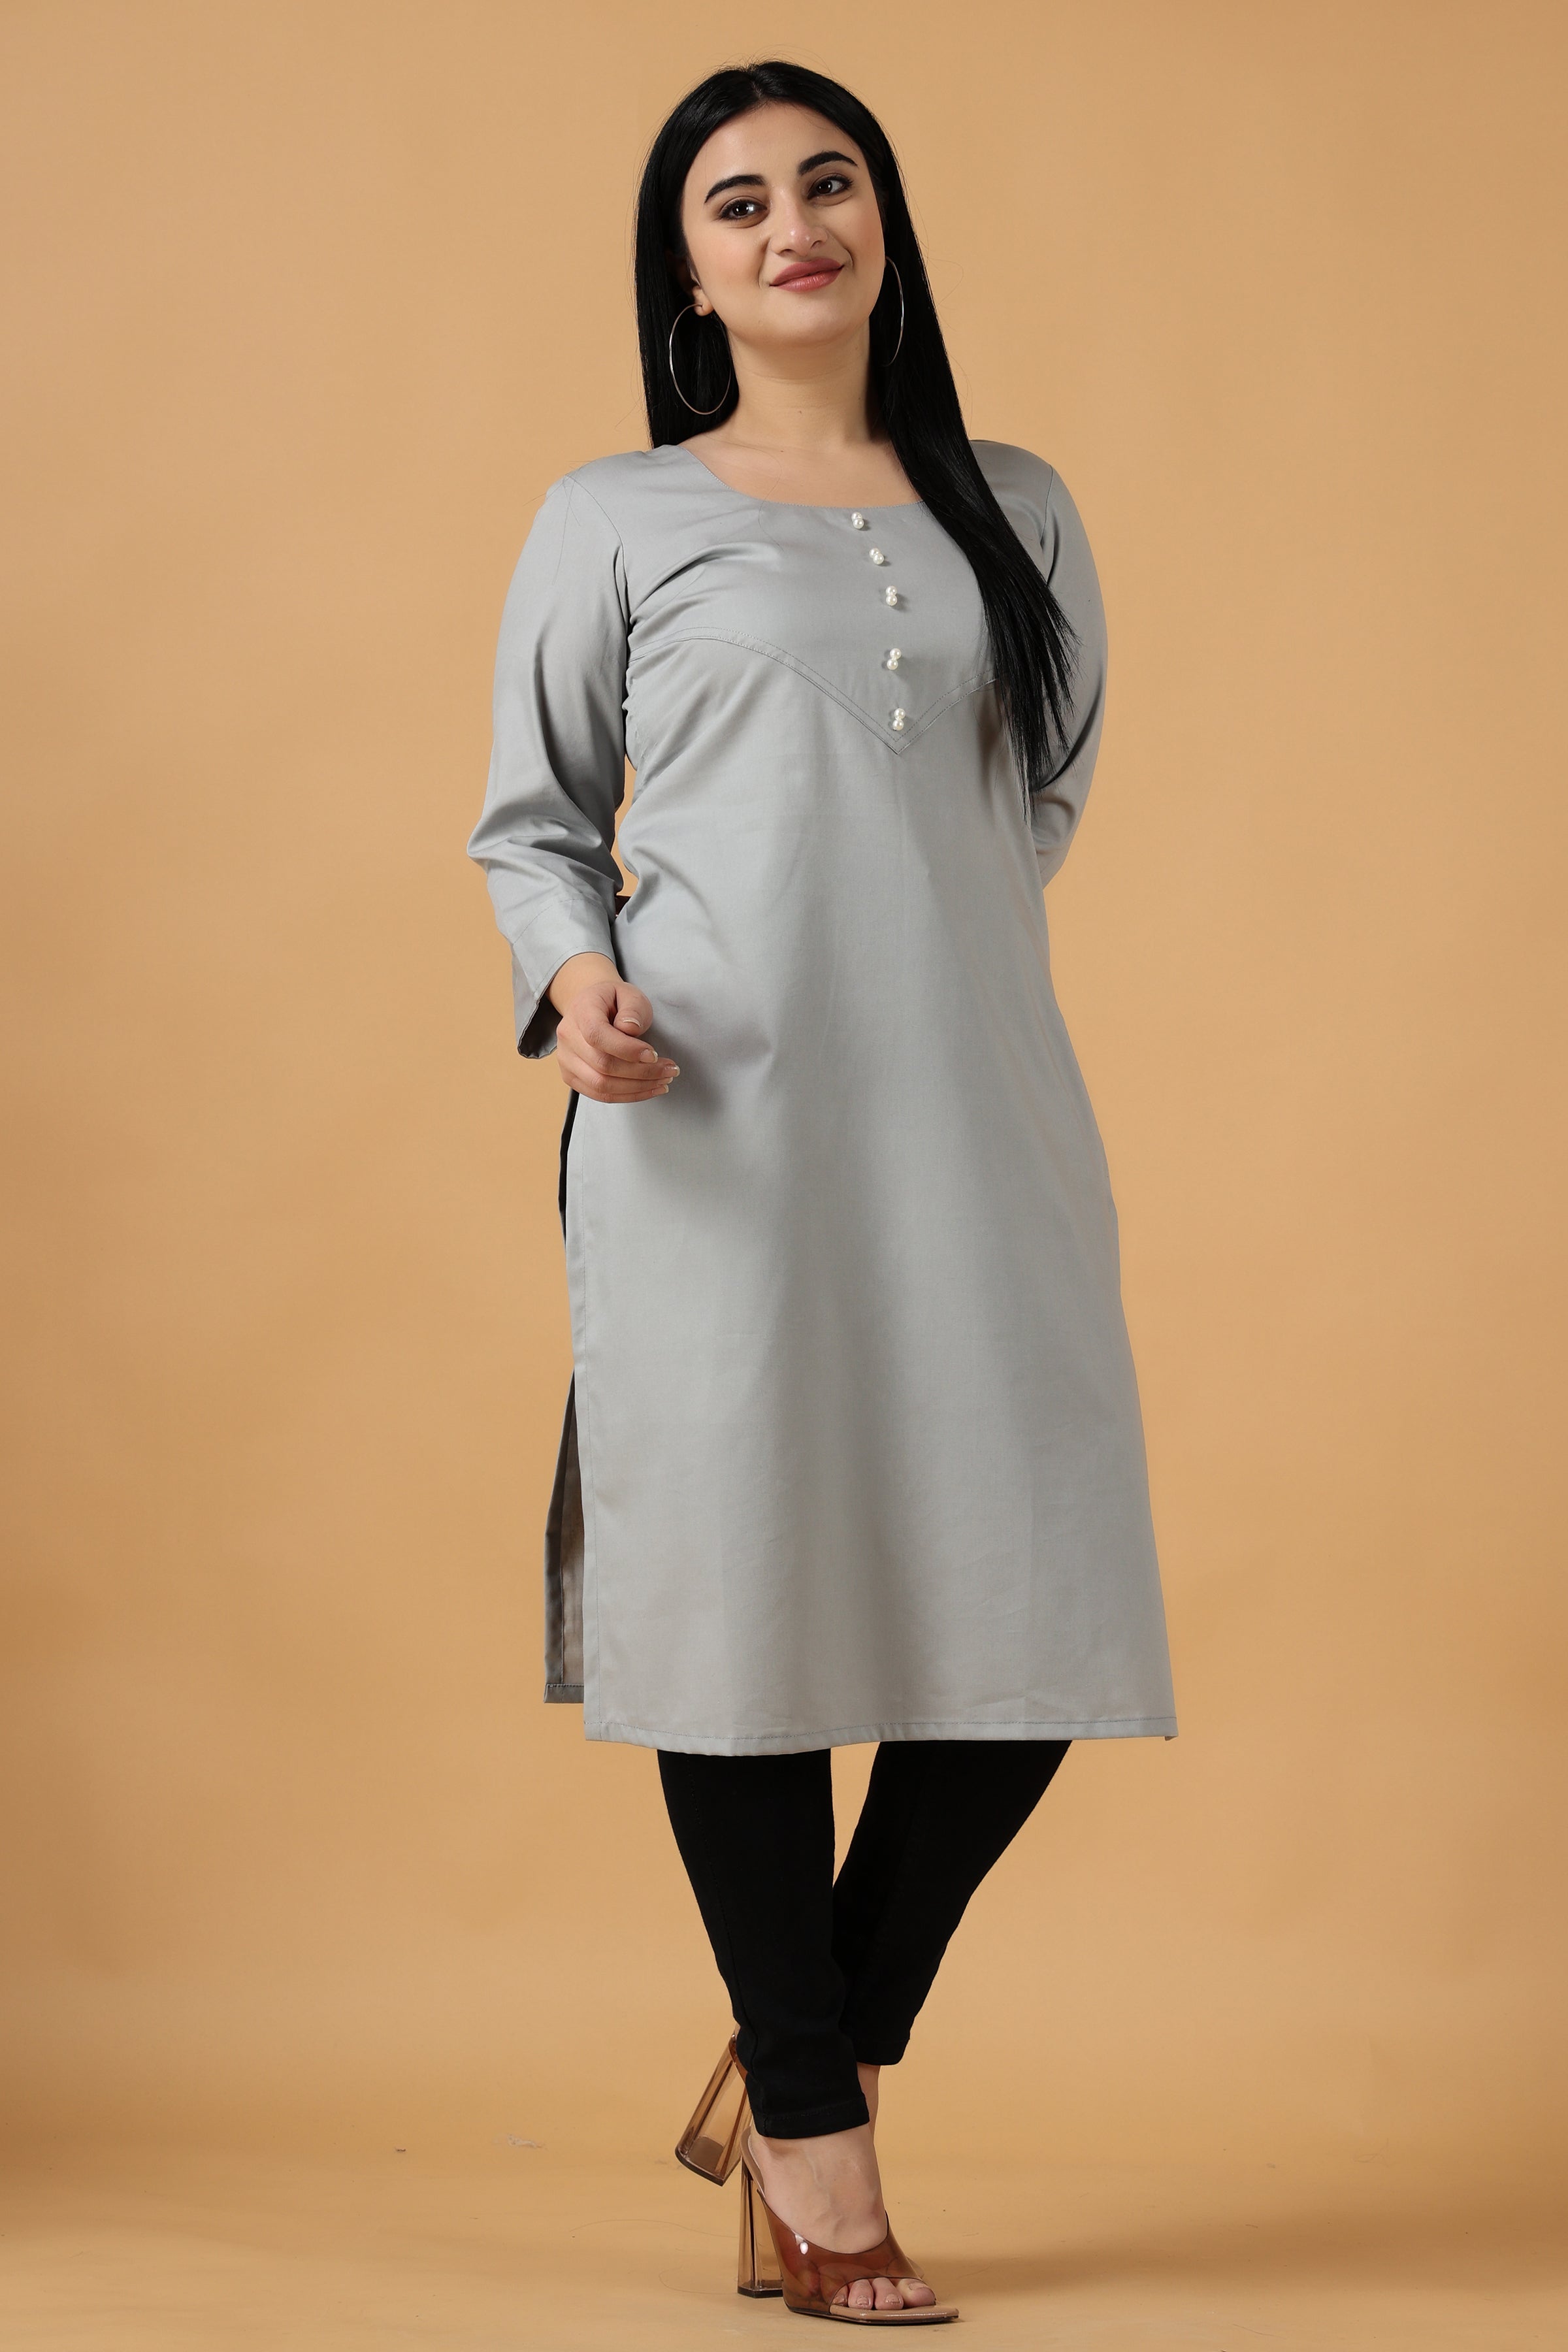 What are some popular choices for daily wear kurtis , and what factors  should be considered when purchasing one?